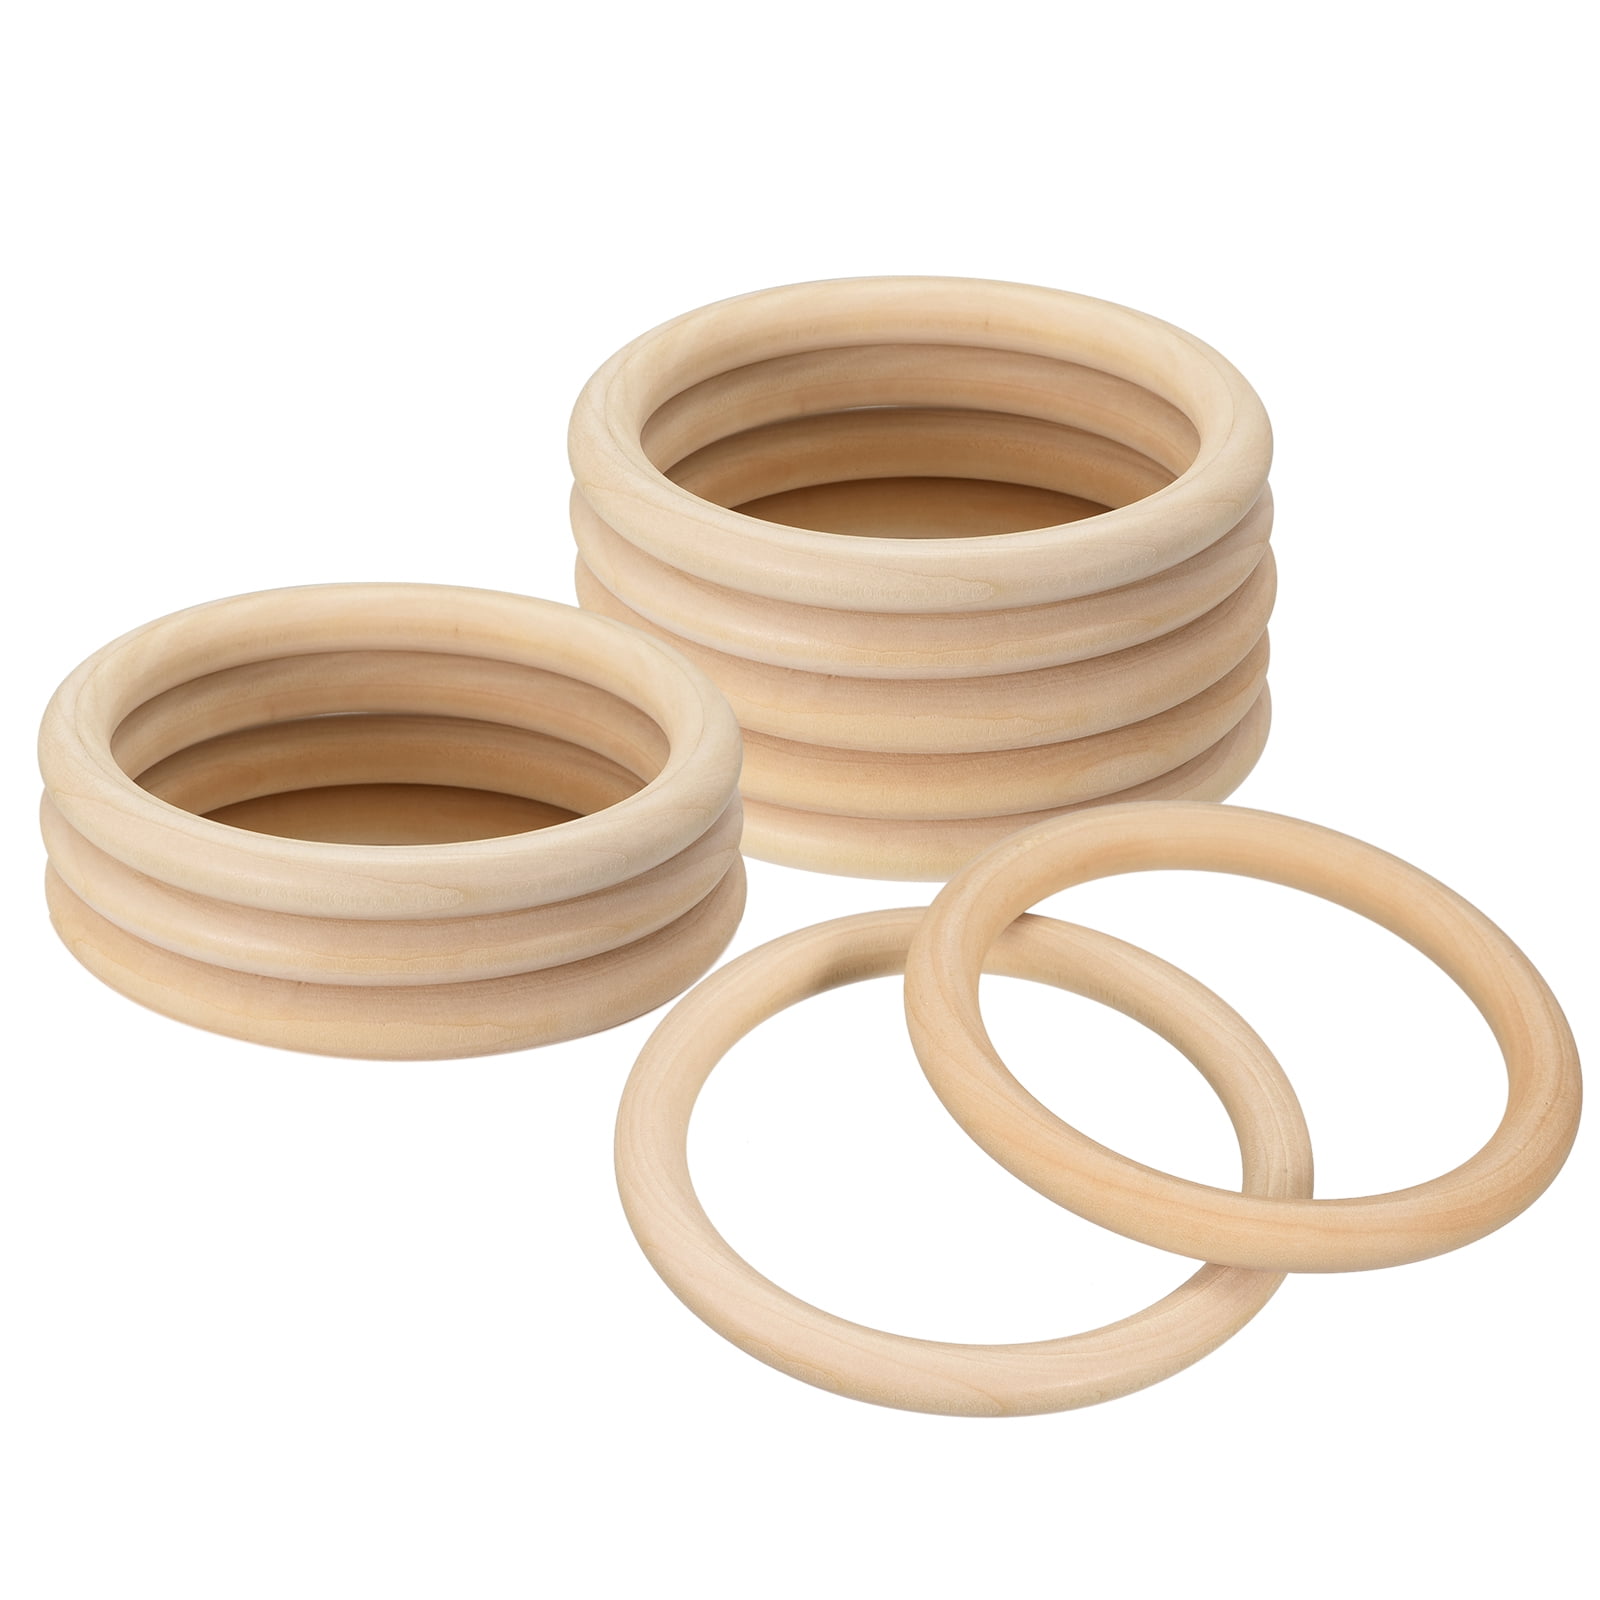 Wood Rings for Crafts 4 Inch, Pack of 25 Unfinished Wooden Rings for  Macrame and Jewelry-making, by Woodpeckers 